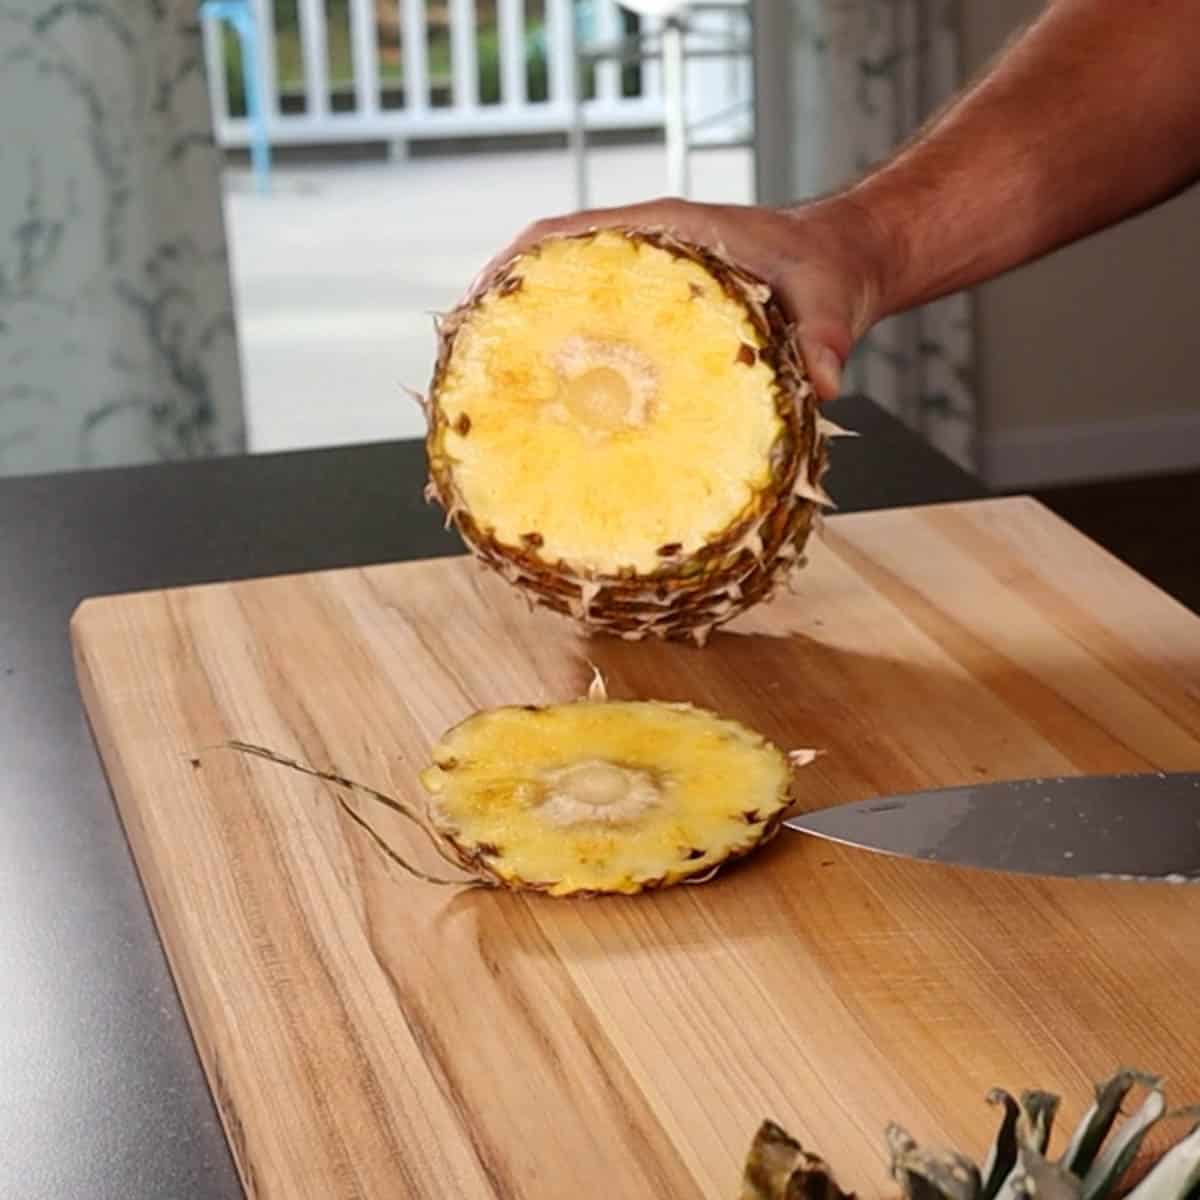 A whole pineapple with the bottom cut off